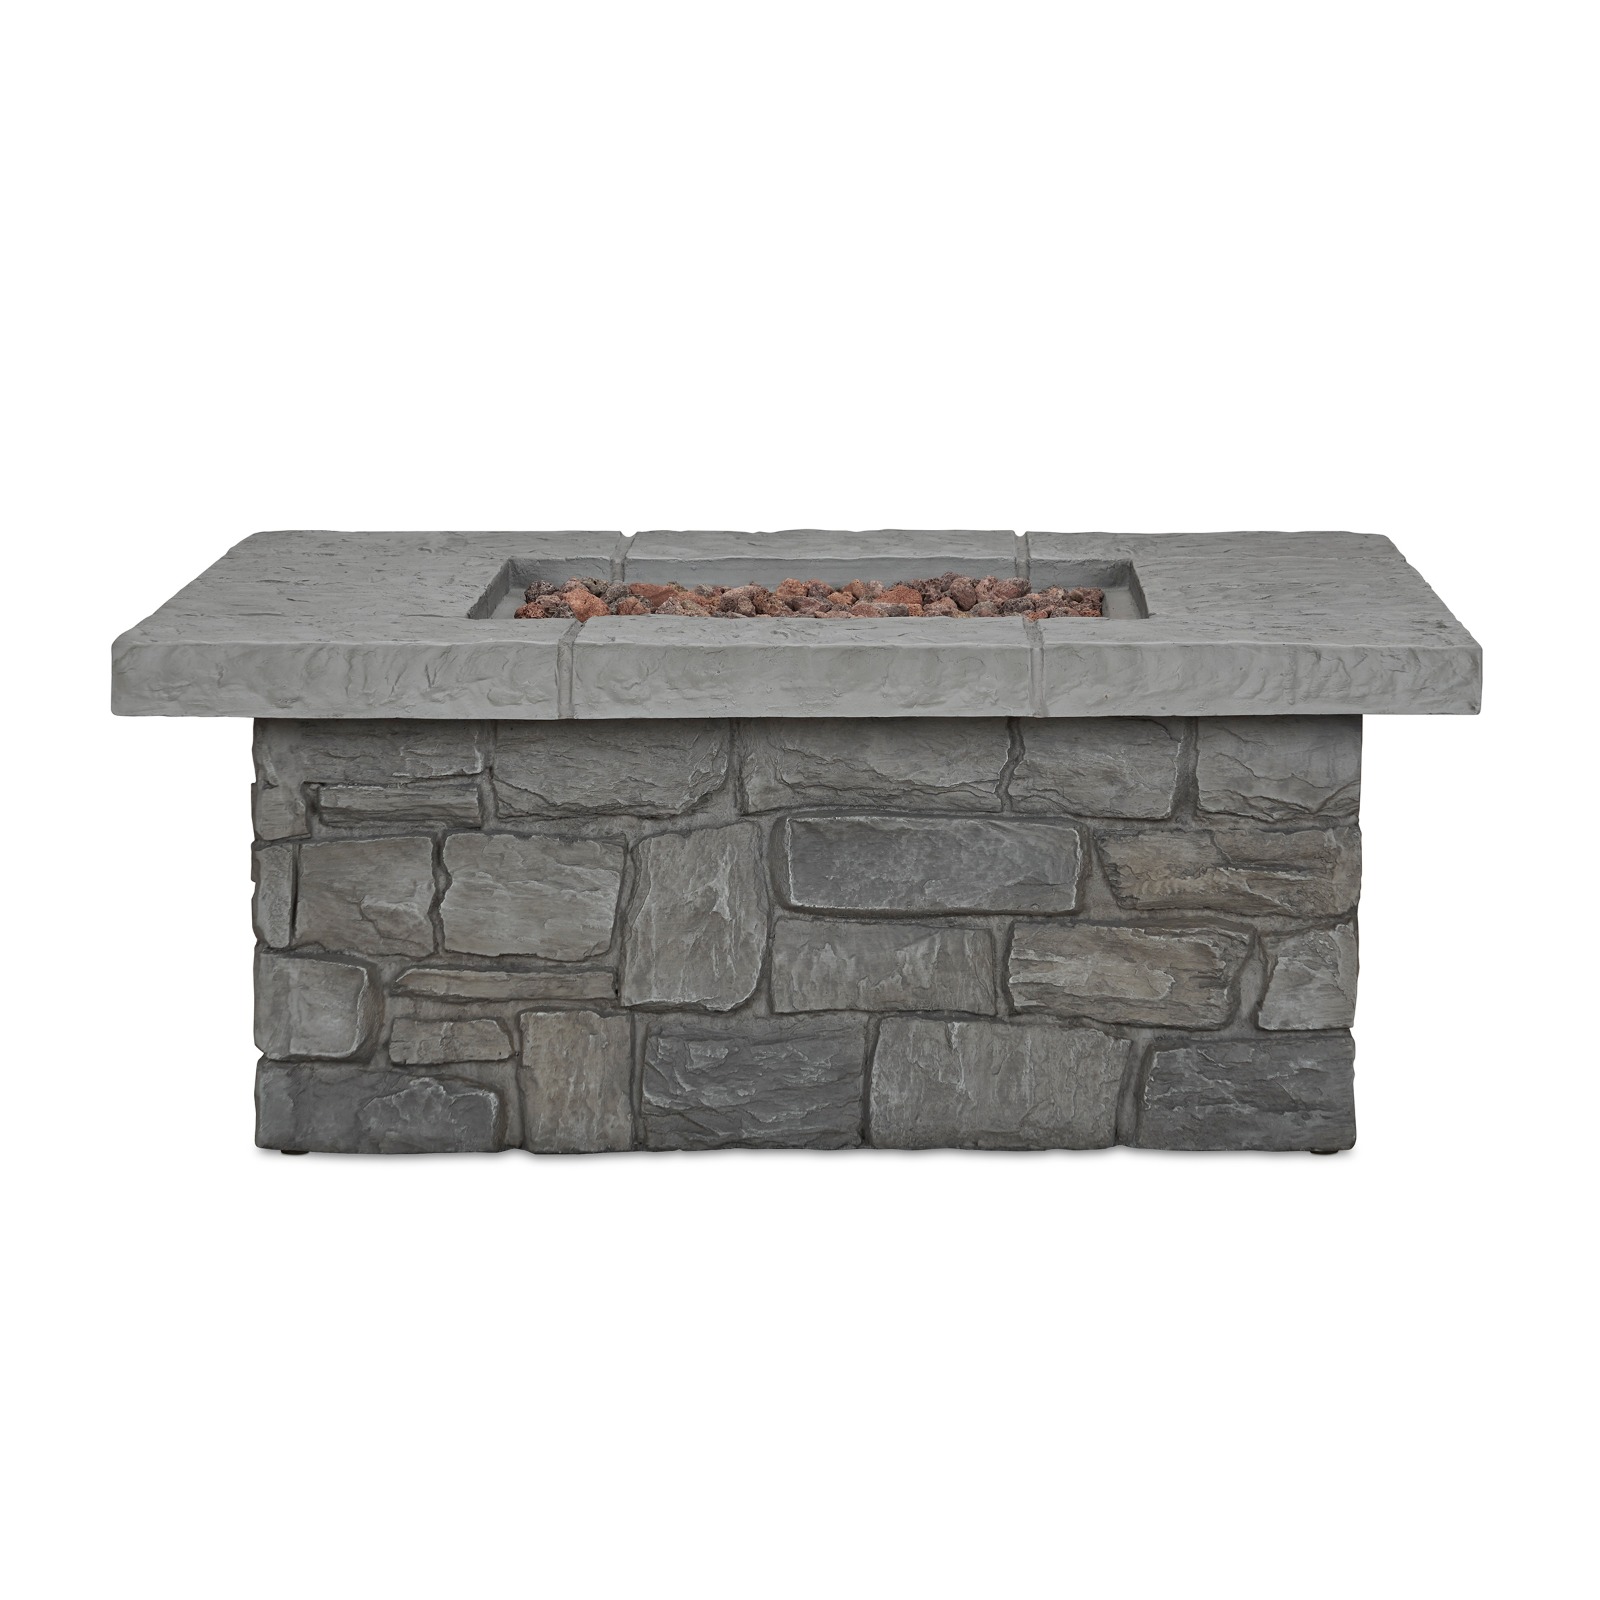 Sedona Square Propane Fire Table with NG Conversion Kit in gray alternate view